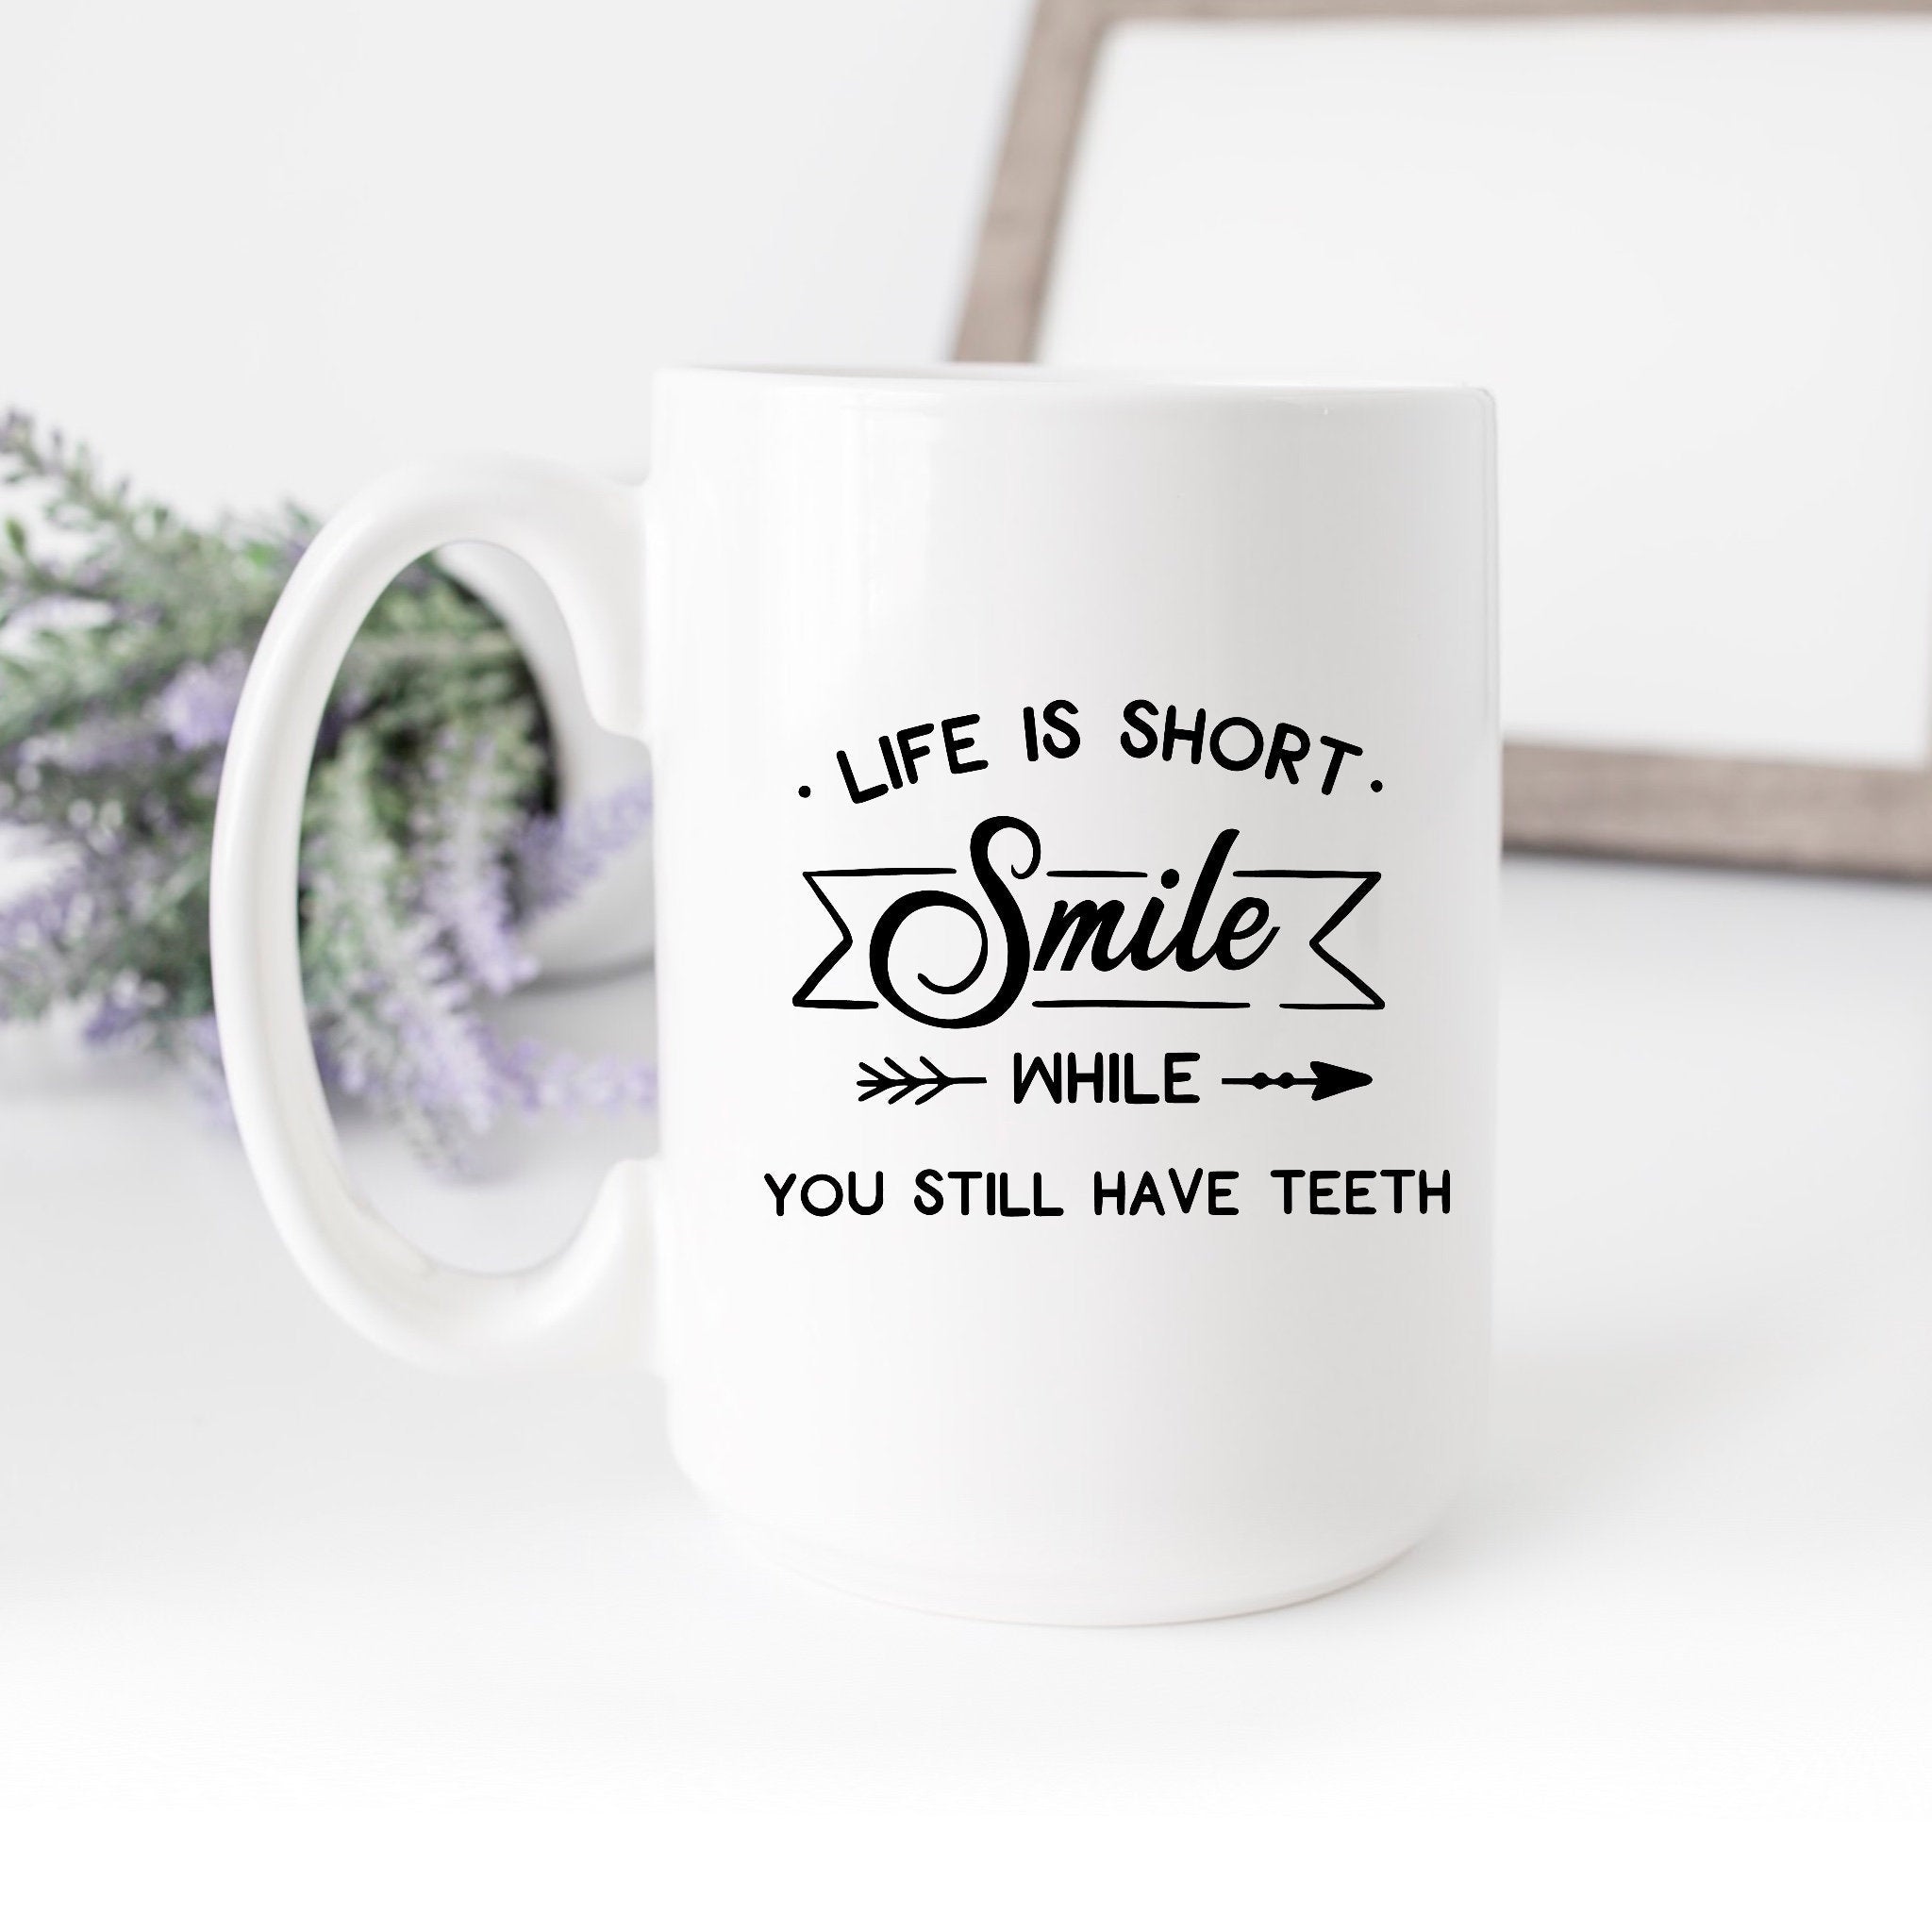 Life is short Coffee Mug - 11 oz. Life is short smile while you still have  teeth funny gift.